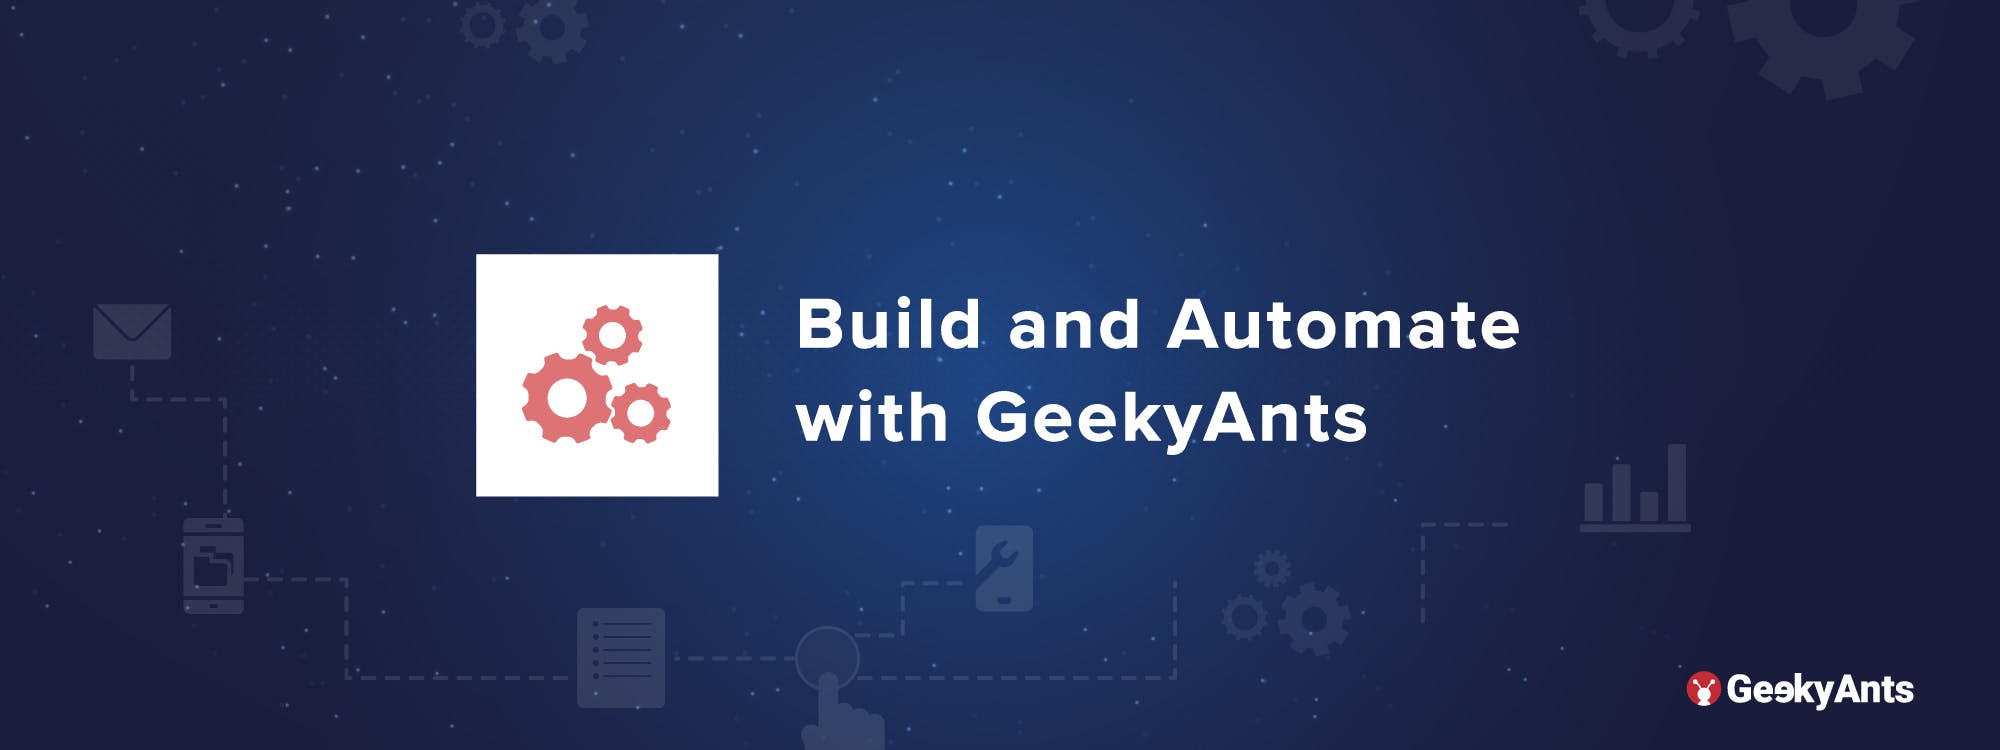 Build and Automate with GeekyAnts